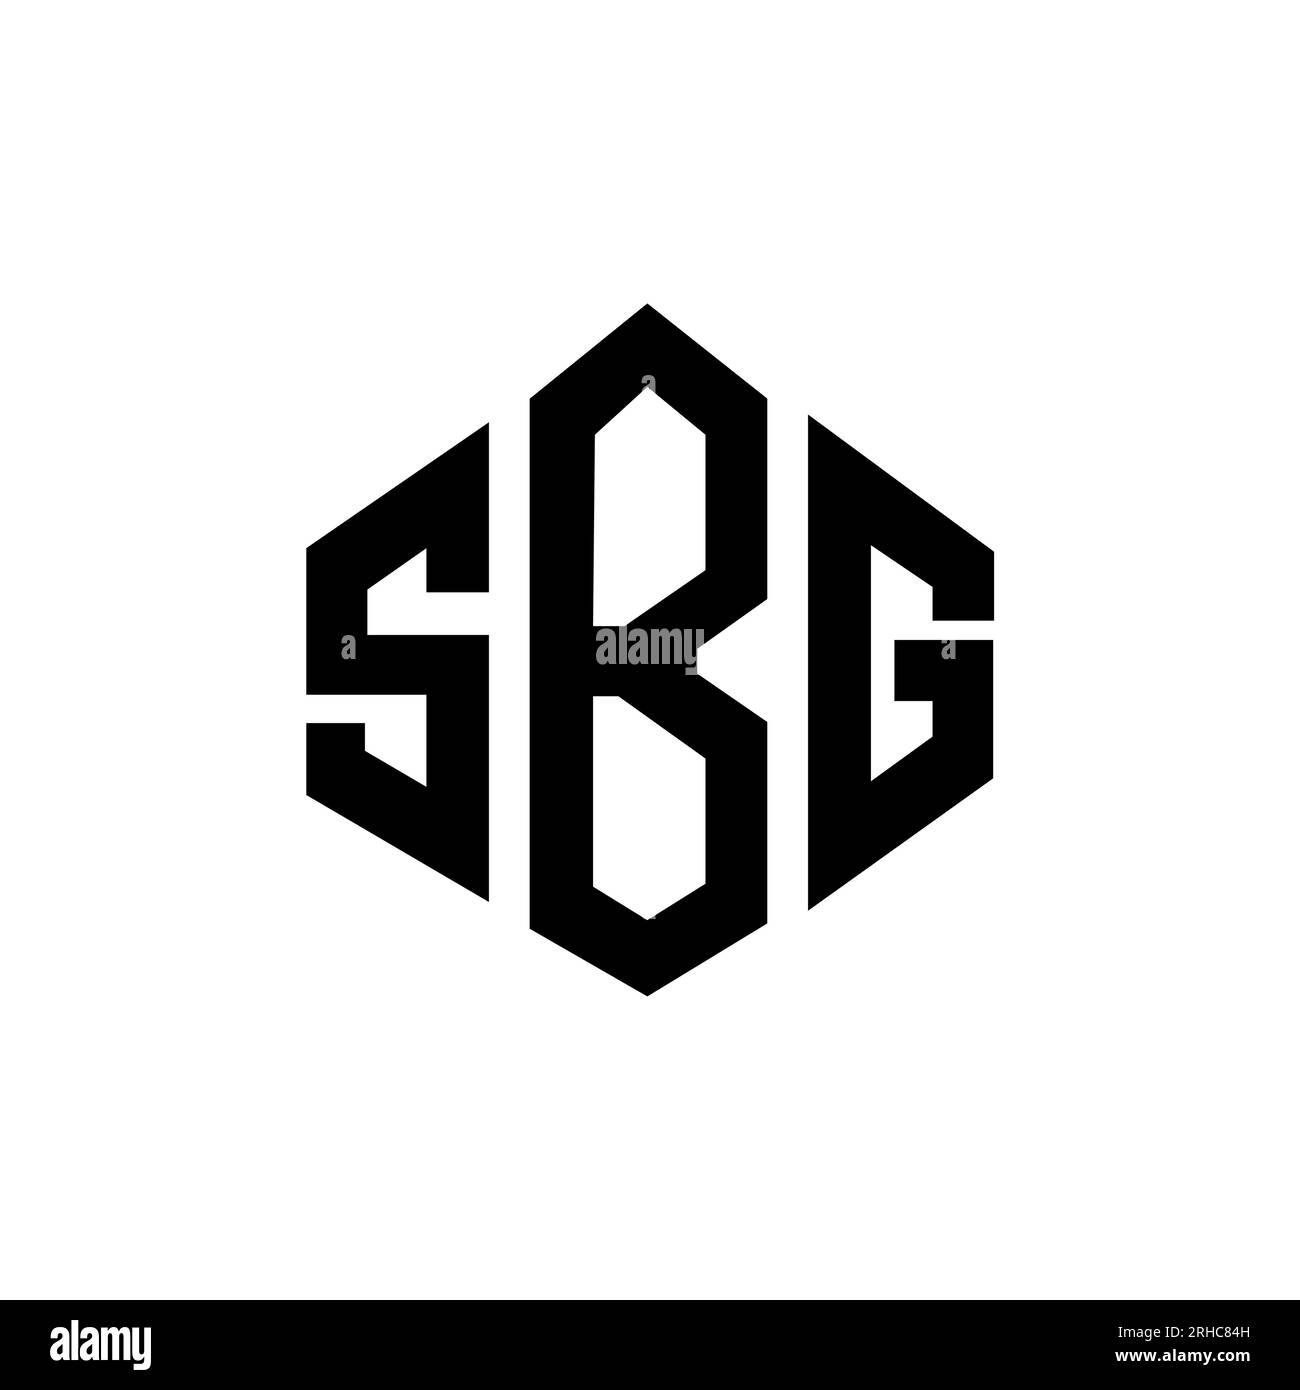 Sbg Company Group Linked Letter Logo Stock Vector (Royalty Free) 1822516235  | Shutterstock